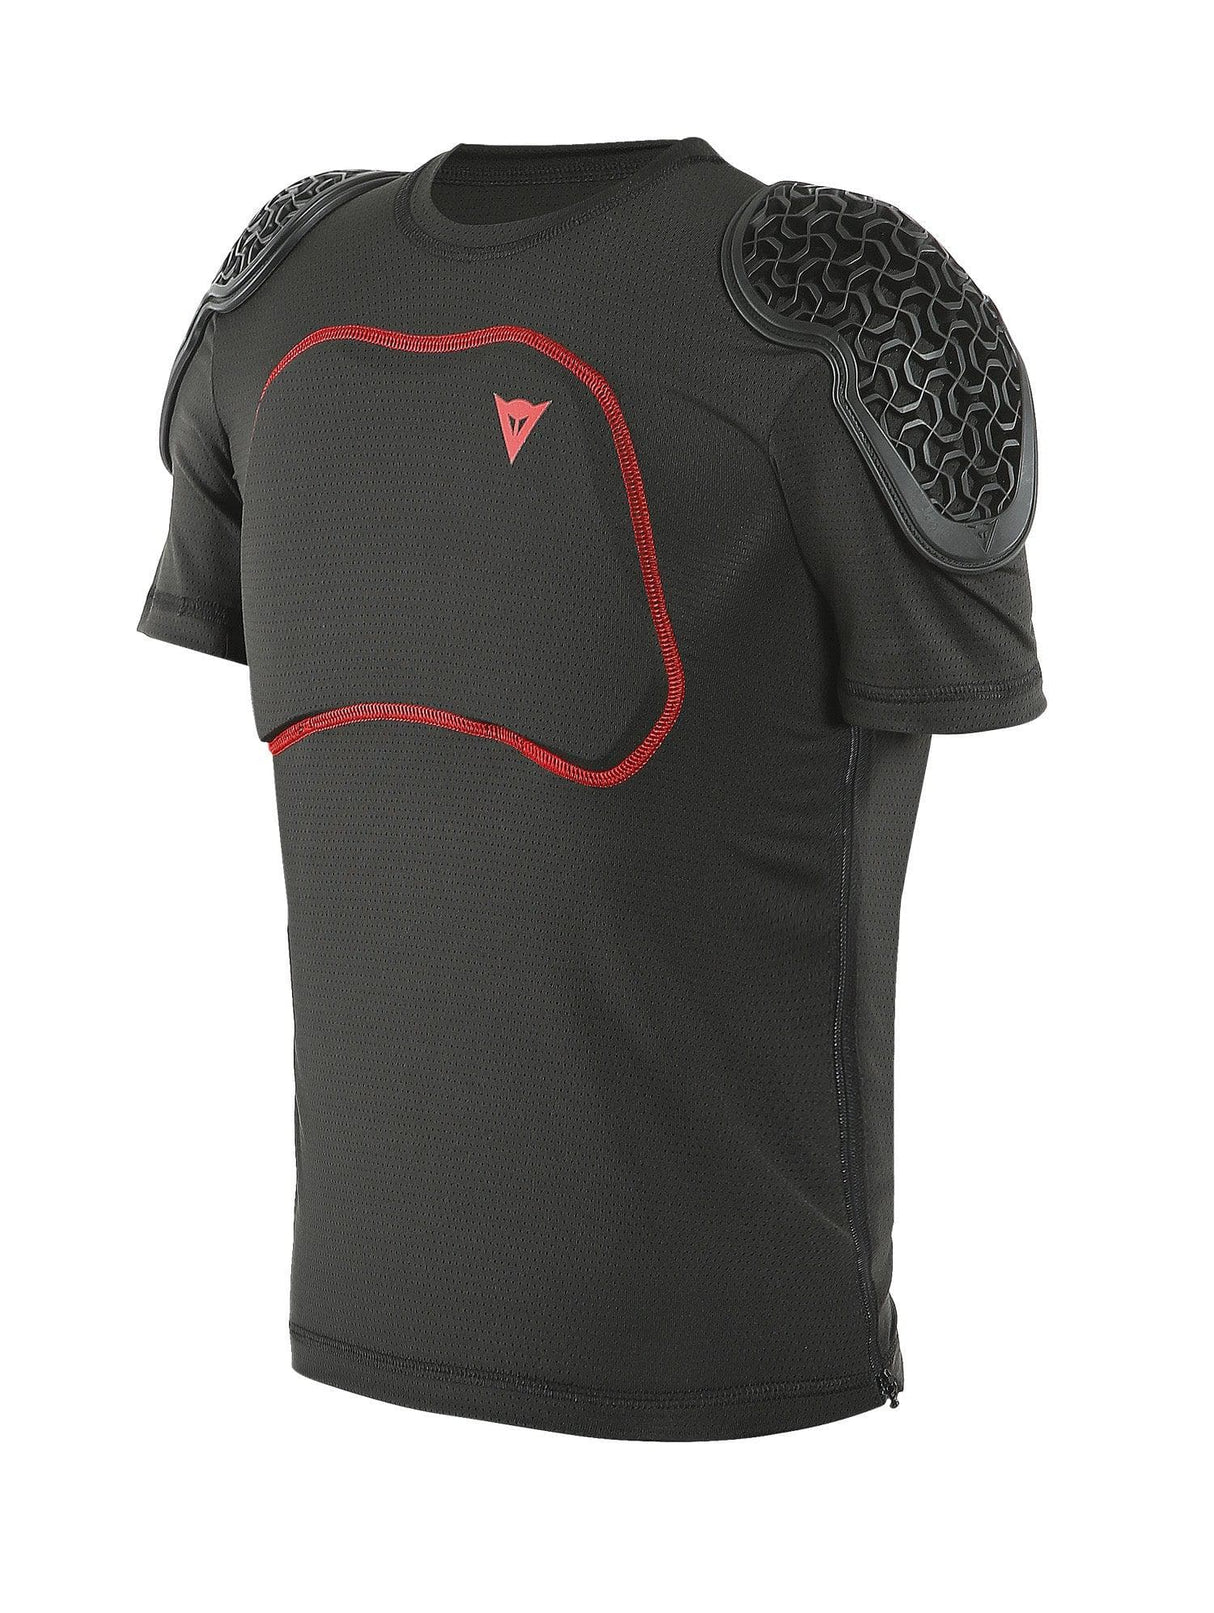 Dainese Scarabeo Pro Juniour Safety Tee (Black, XL)